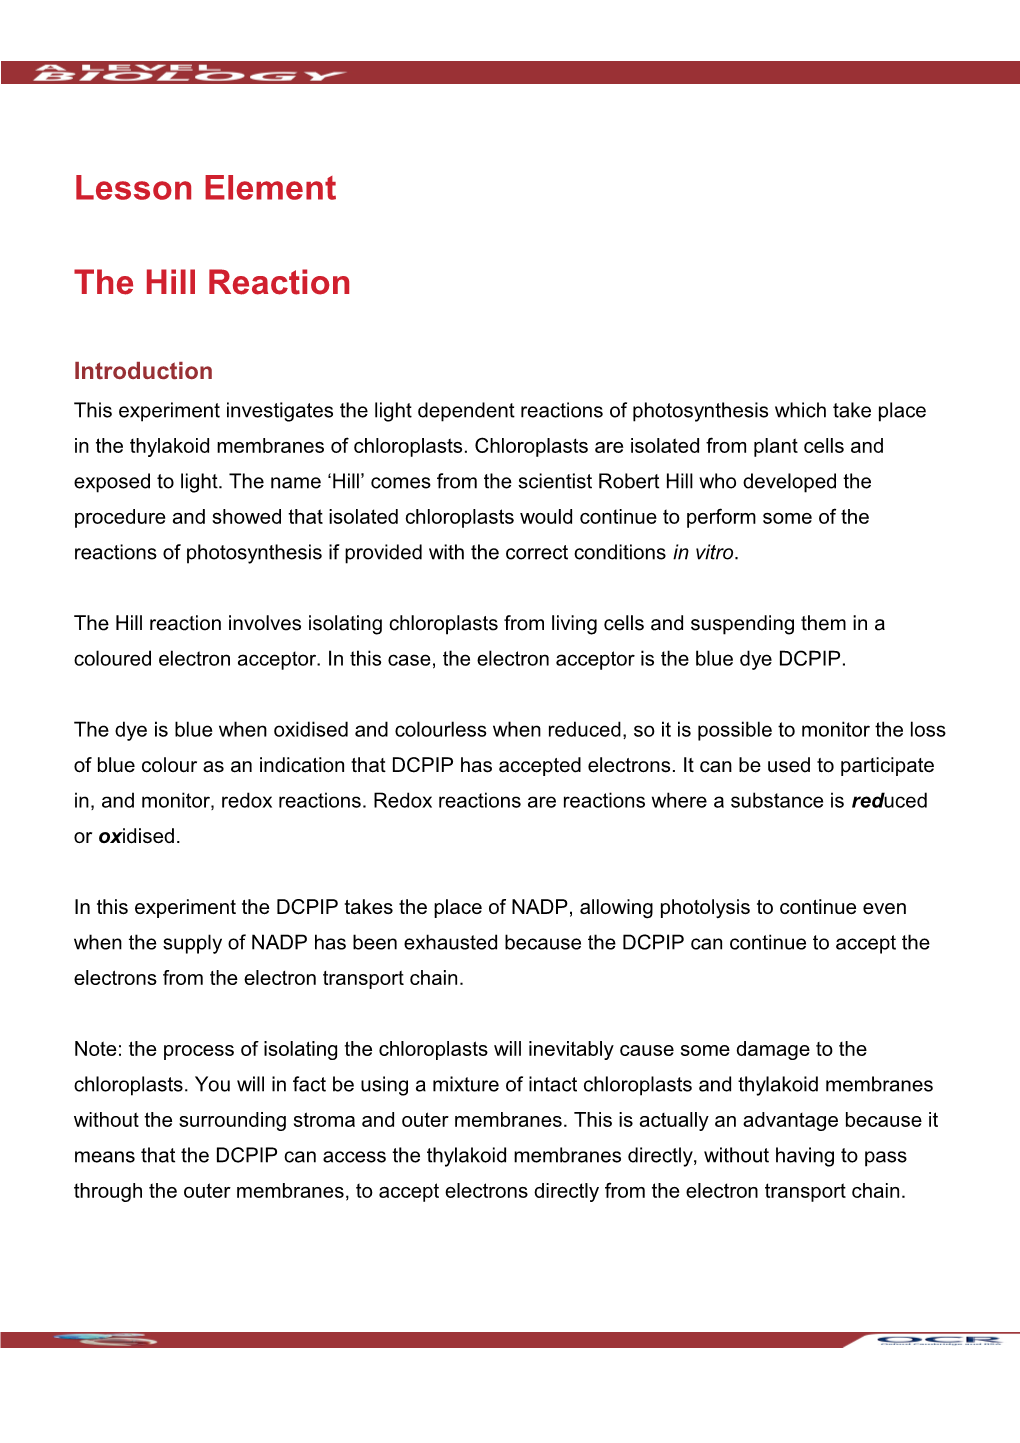 A Level Biology Lesson Element (The Hill Reaction)